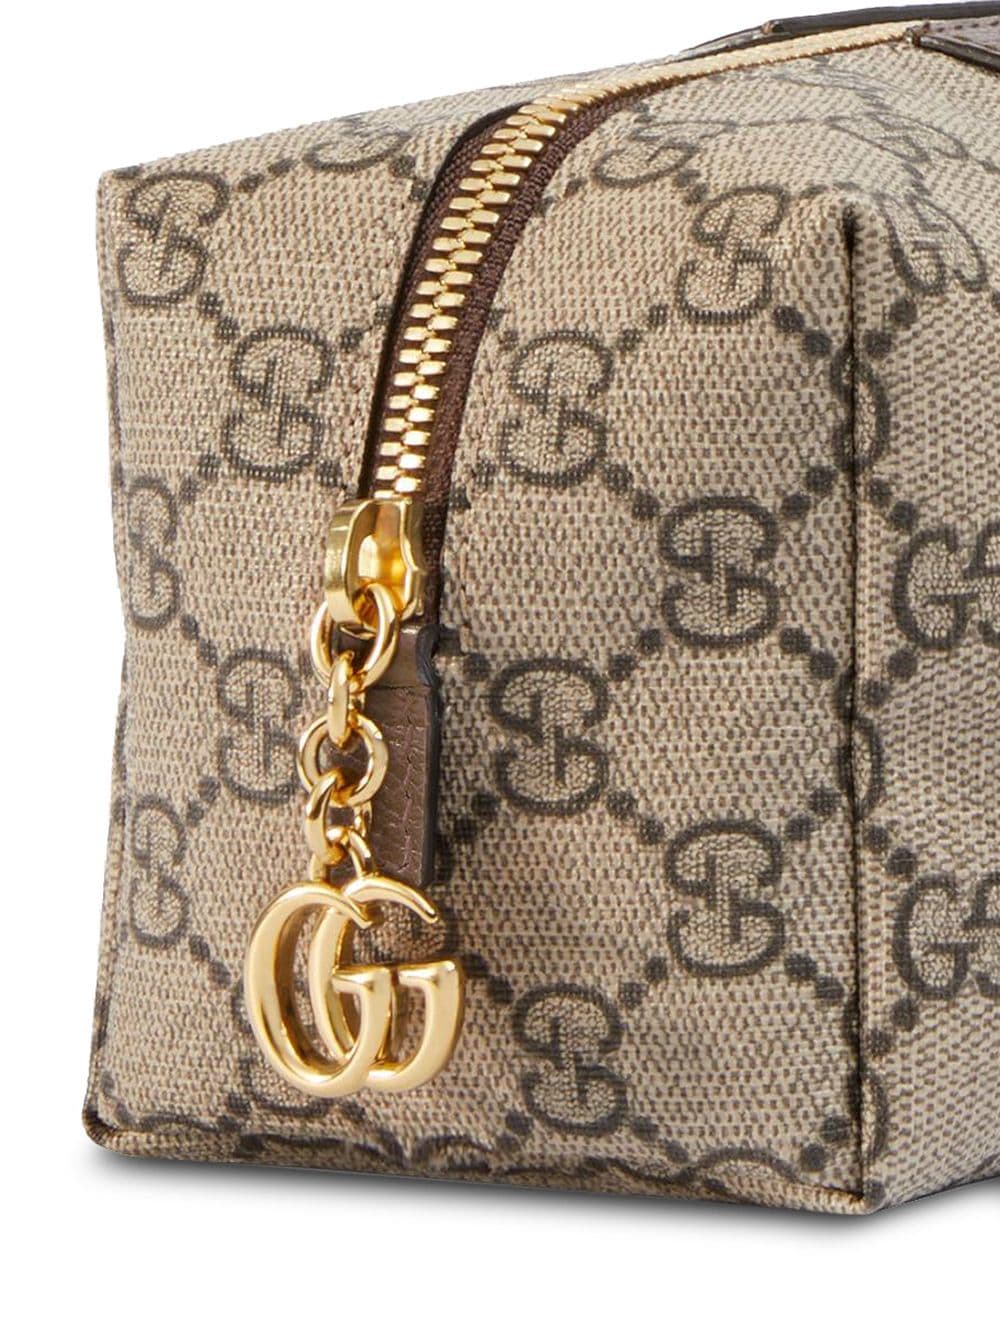 Gucci Ophidia GG cosmetic case